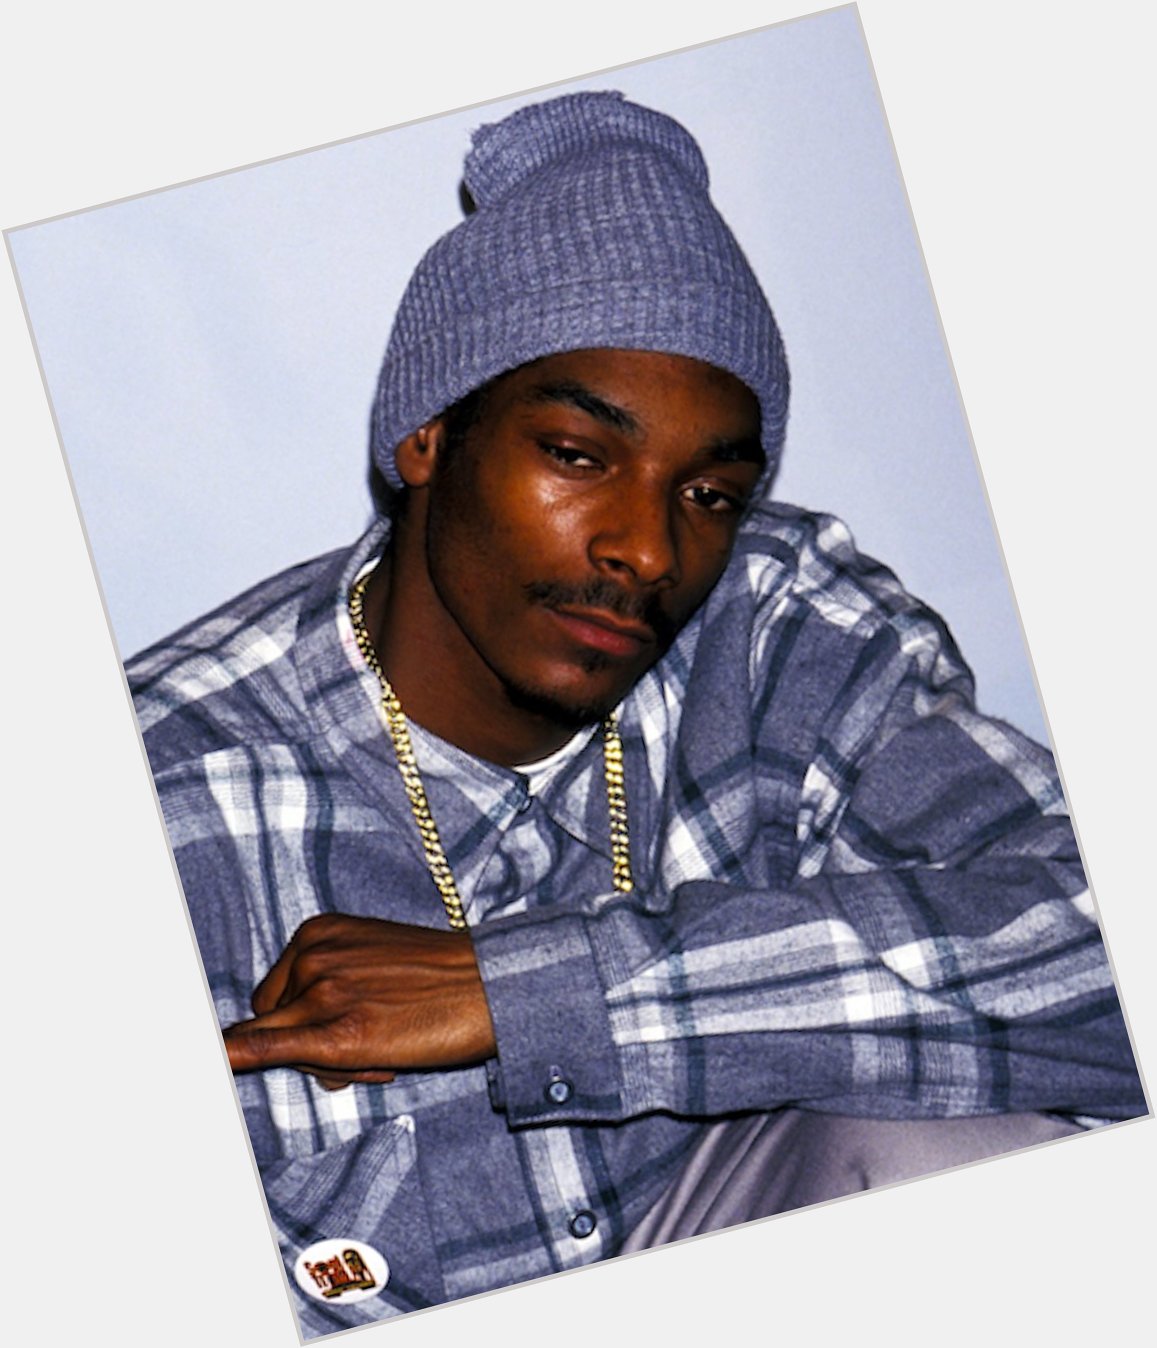 Happy 50th birthday to Snoop Dogg today! 